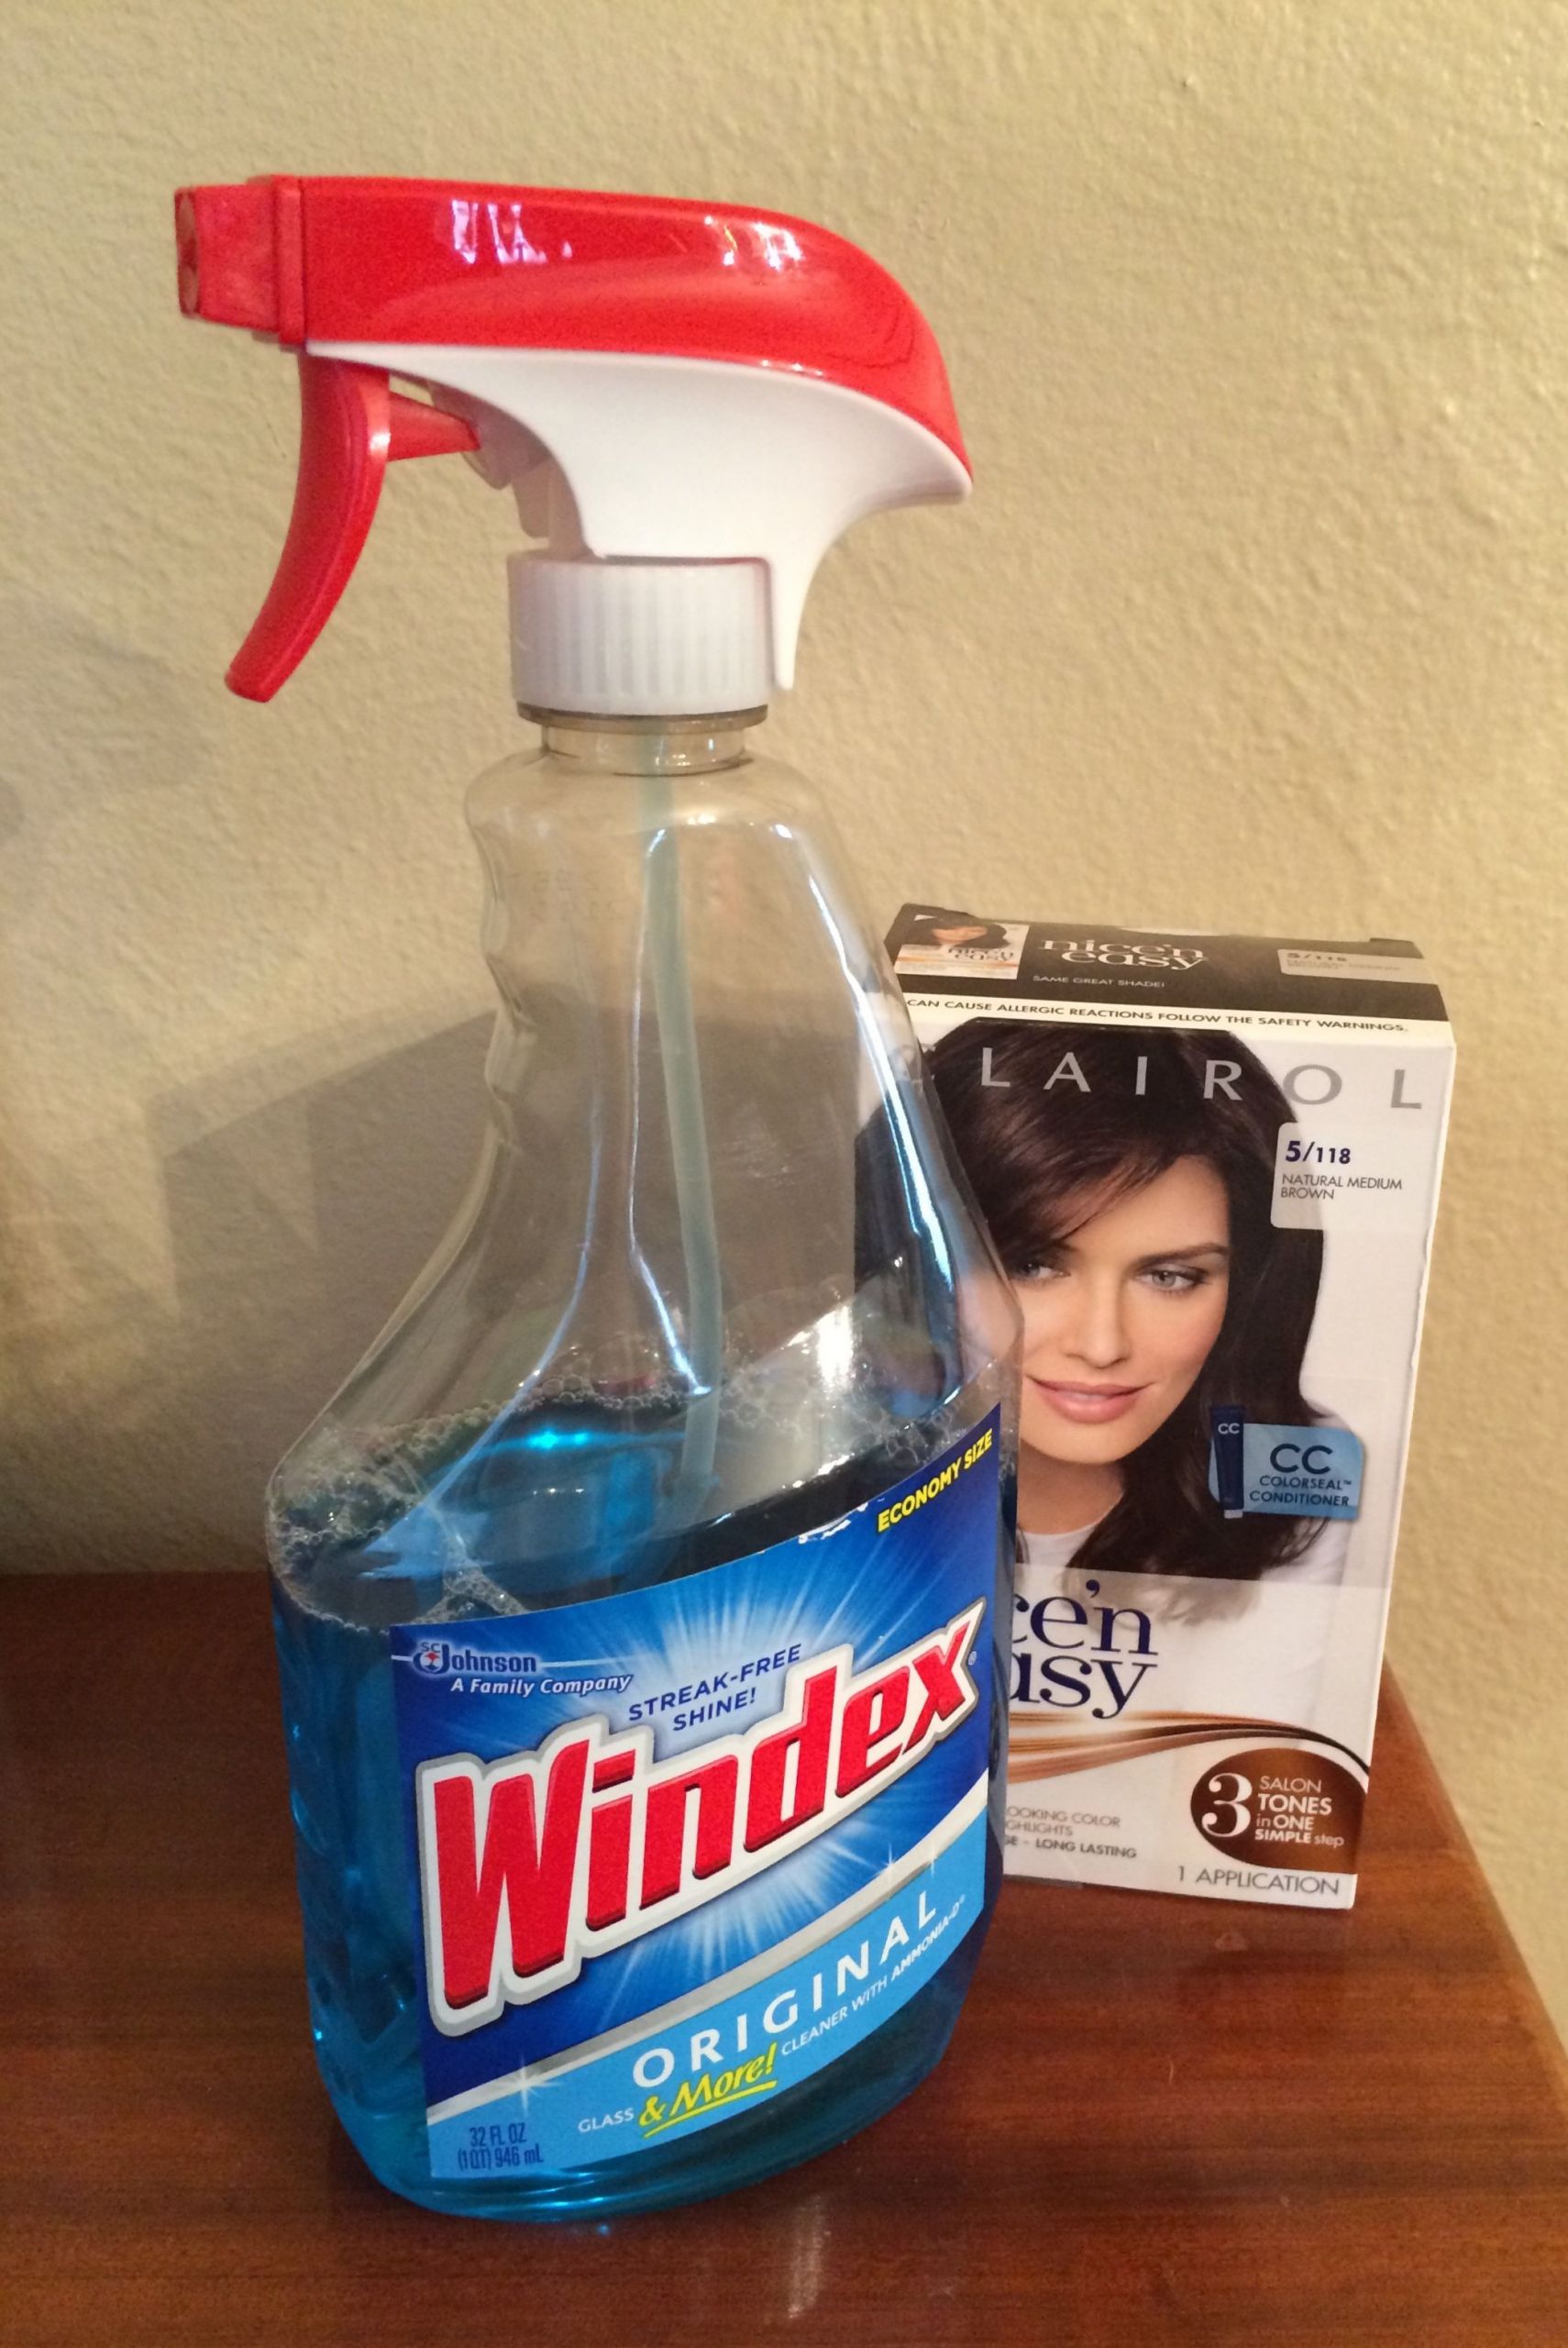 DIY Hair Color Remover
 My hair stylist told me you can use Windex on a cotton pad